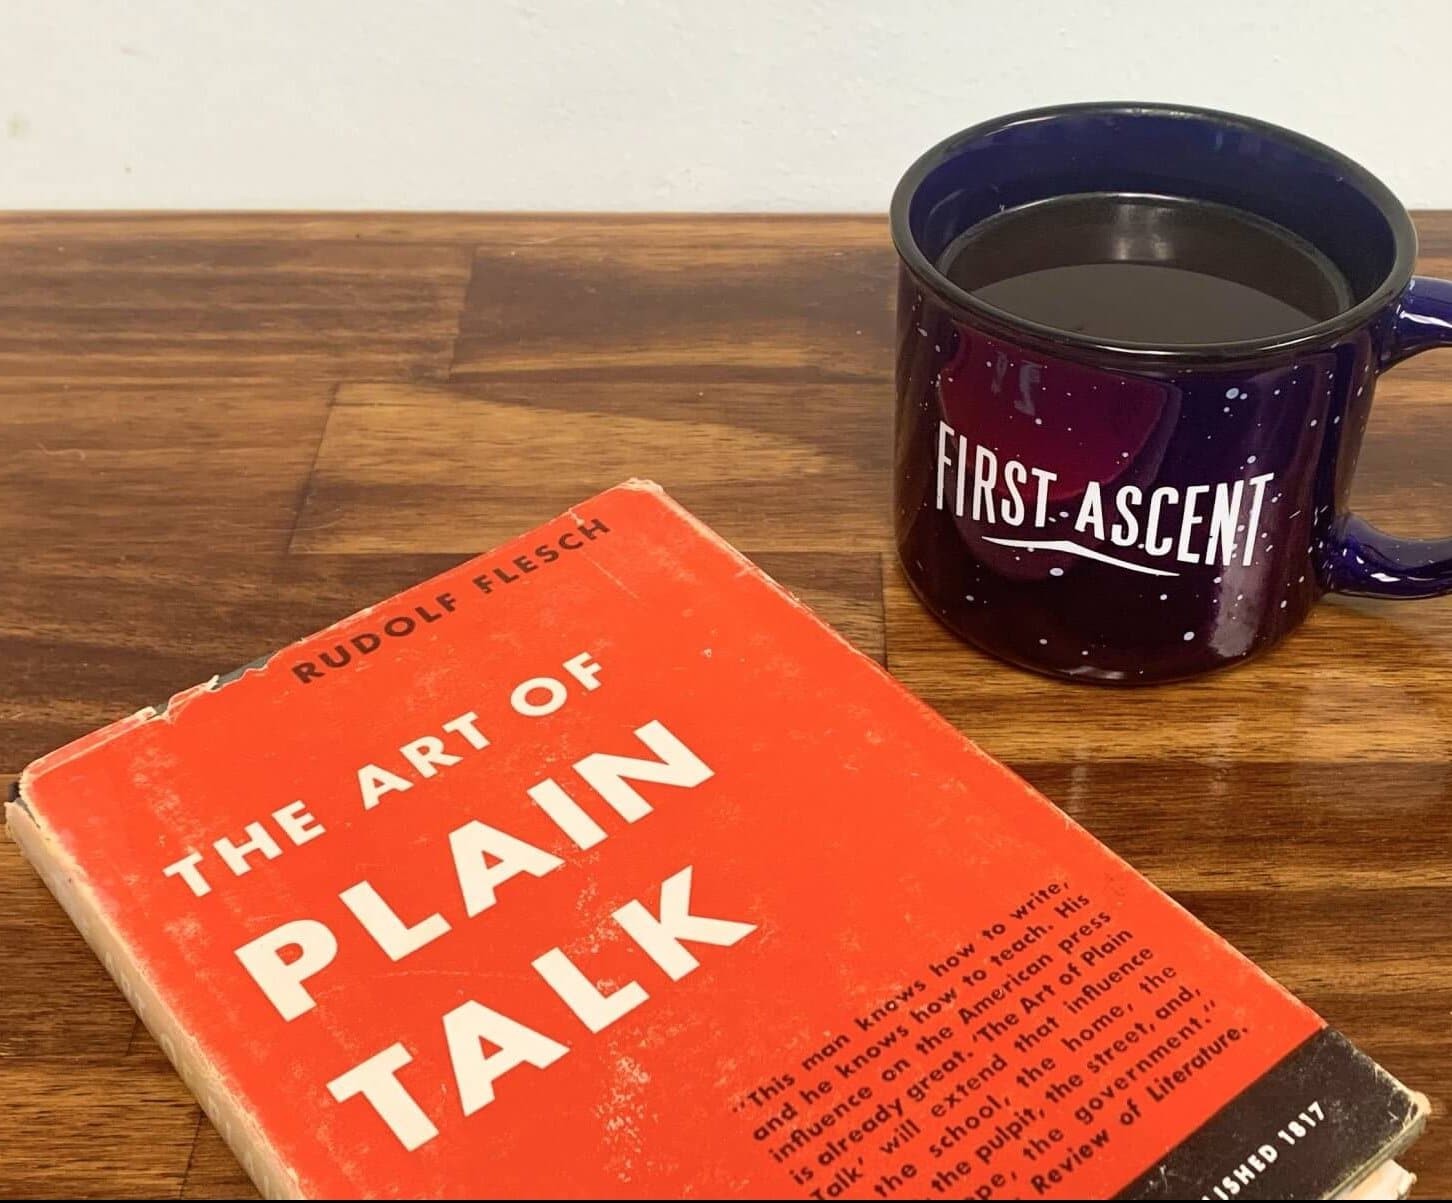 The book, The Art of Plain Talk, and a First Ascent coffee mug on a desk